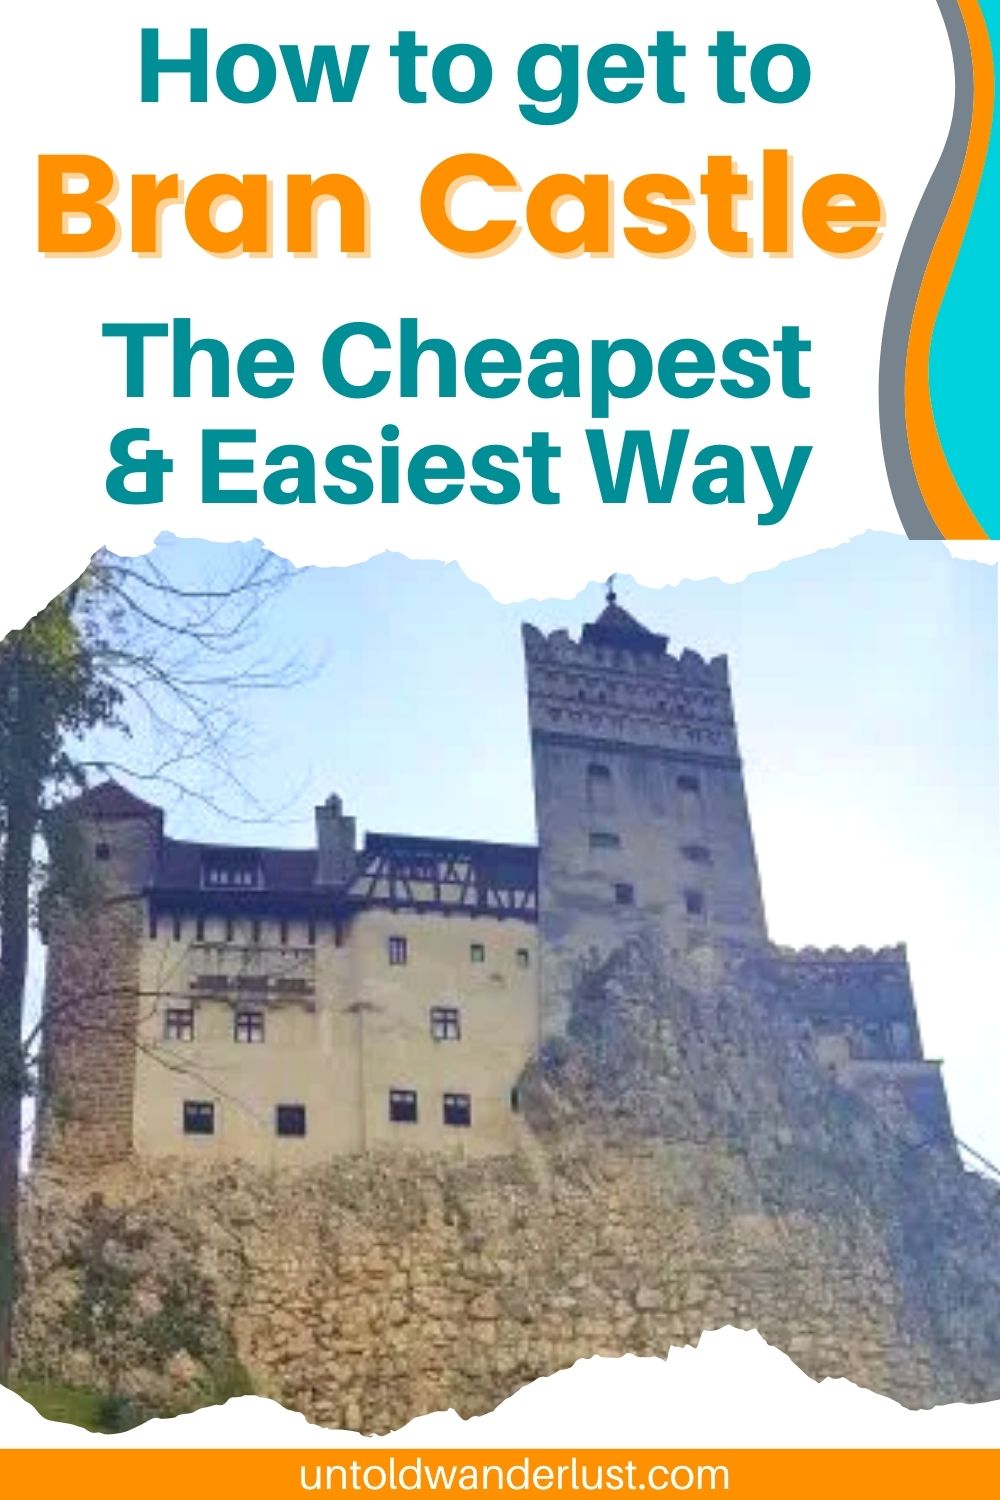 How to get to Bran Castle the Easiest & Cheapest Way